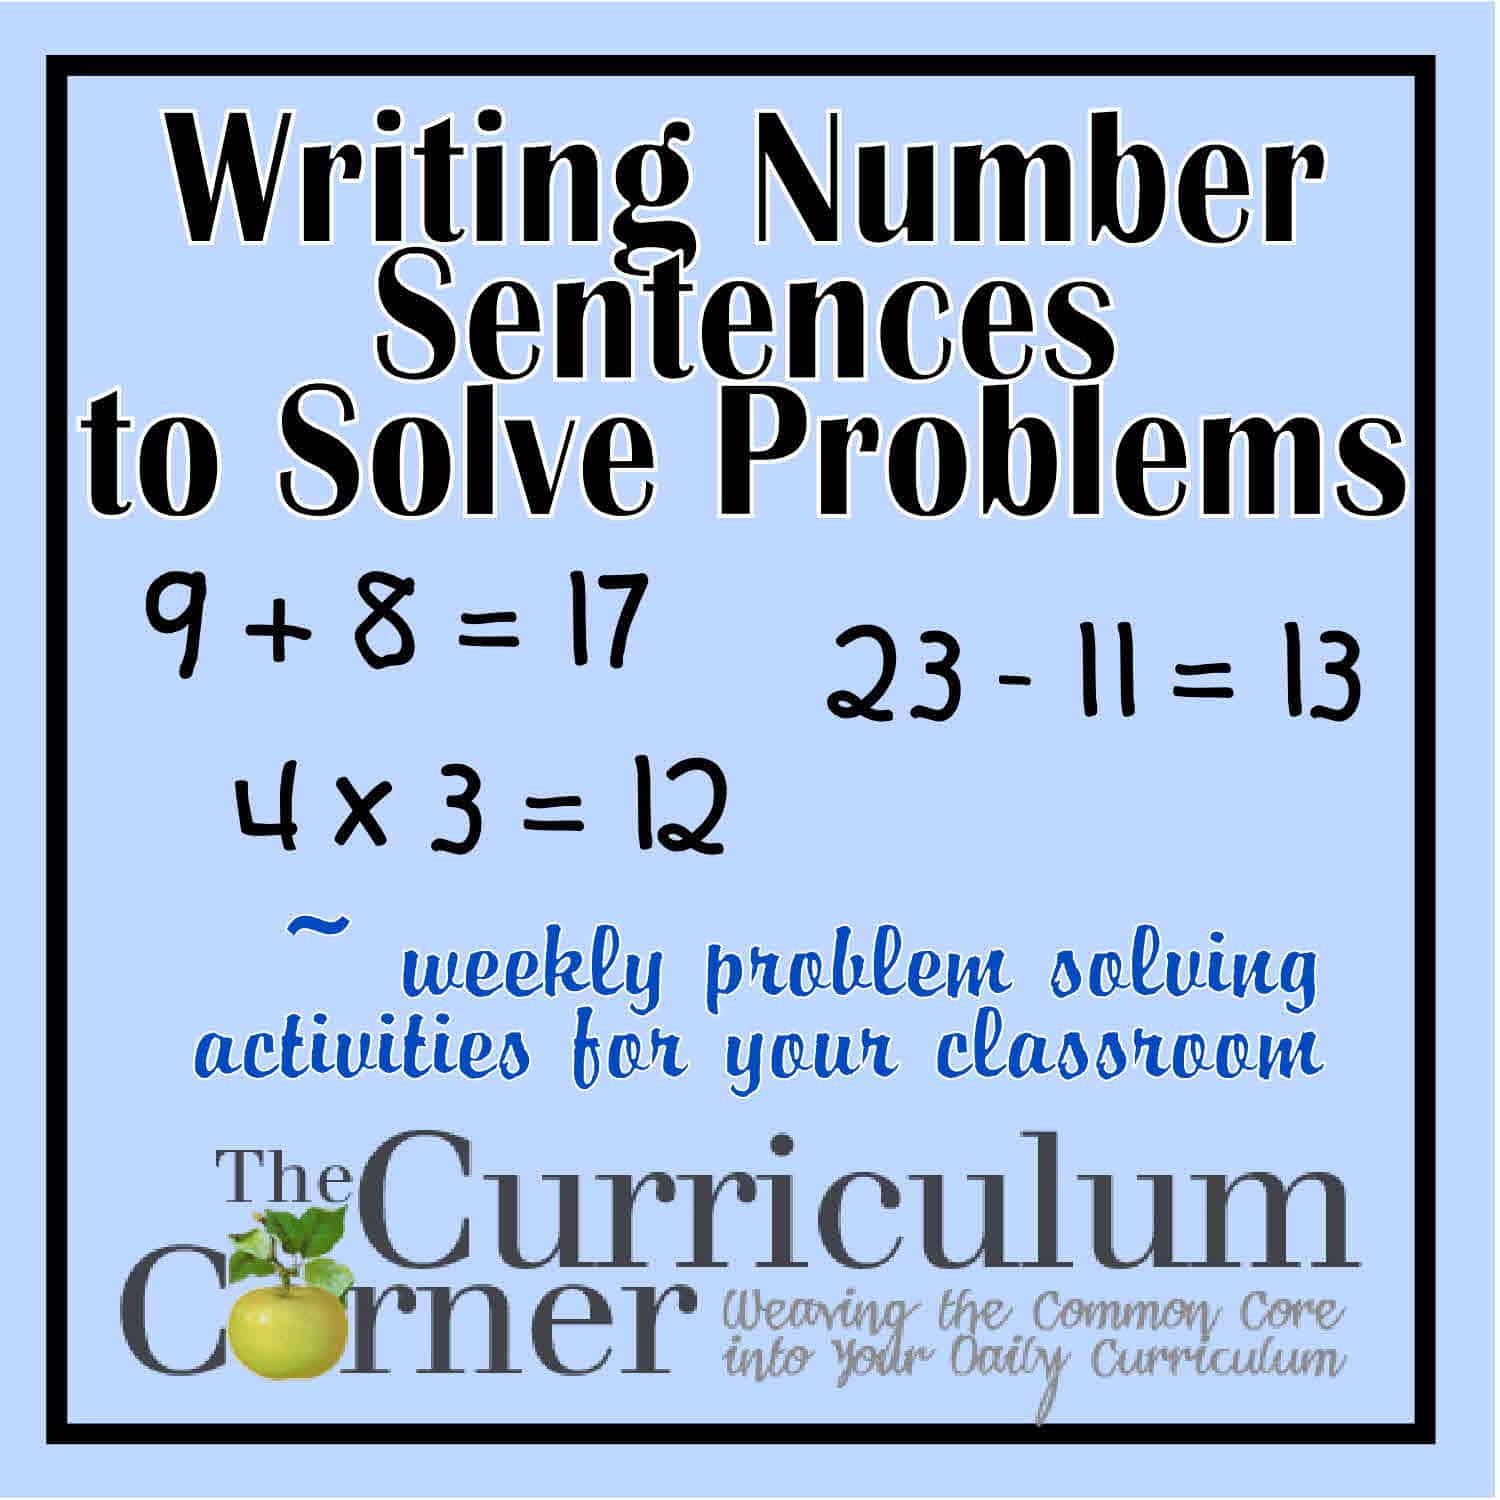 addition-word-problems-hands-on-activity-worksheets-ten-frames-word-problems-and-sentences